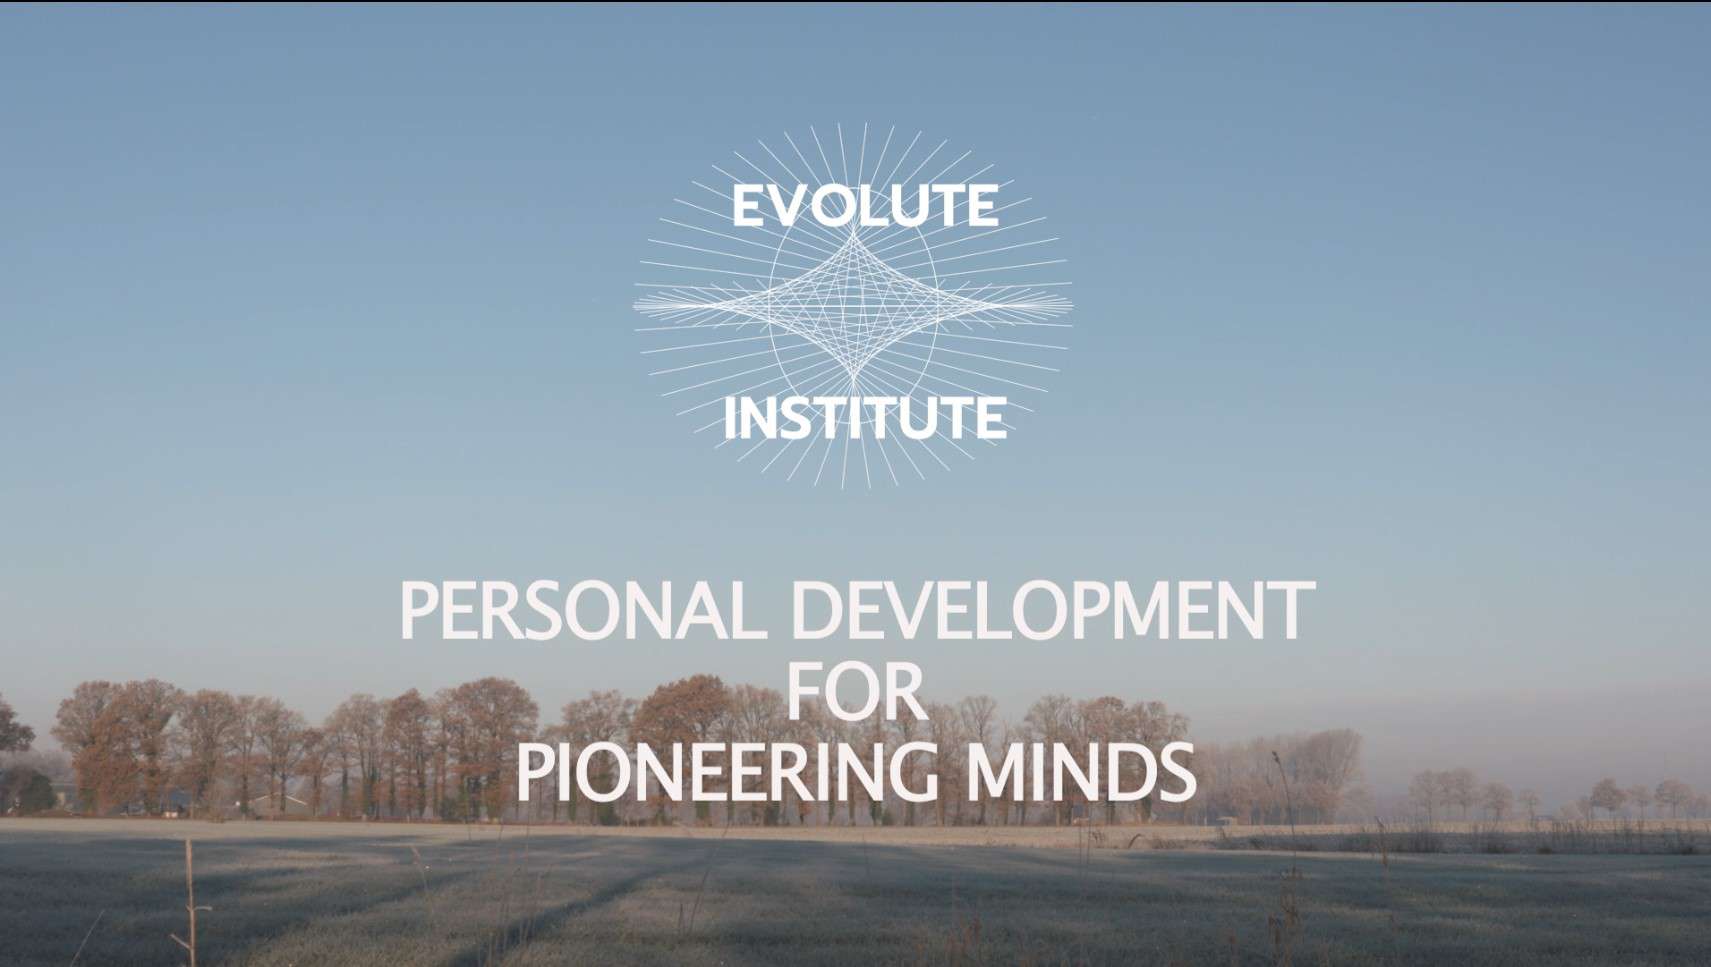 evolead psychedelic retreat program for personal development for pioneering minds from evolute institute